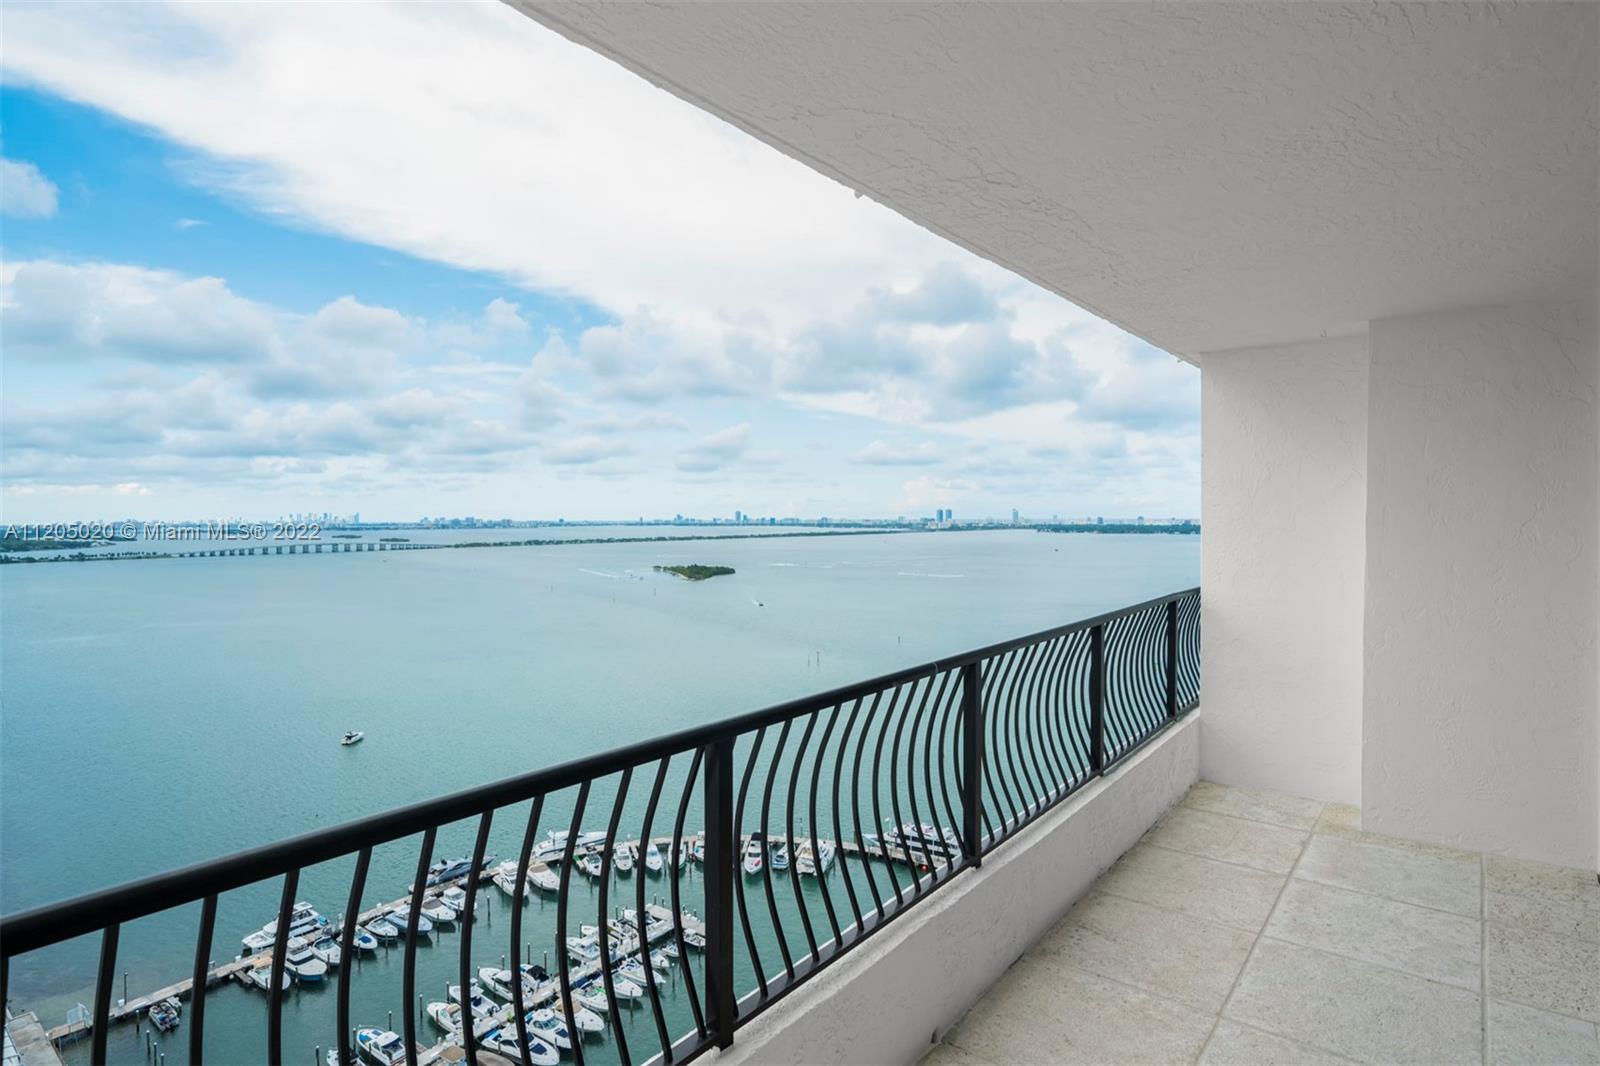 Wake up to gorgeous water views in this very well maintained 1bed 1.5 bath apartment at the VENETIA CONDO. Well appointed, renovated kitchen and bathrooms, and one assigned parking space. Laundry room on the same floor. The Venetia offers its residents full services, including concierge, 24 hour security, valet parking, and amenities including 2 pools (currently UNDER RENOVATION), tennis courts, gym, on-site restaurant and beauty salon. Direct access to the boardwalk to Margaret Pace Park, which has two dog parks, tennis courts, basketball court etc. Easy access to the Venetian for jogging or biking. Next door to the Arsht Center, PAMM, FTX arena, and Publix. Building requires a $1,000 security deposit.